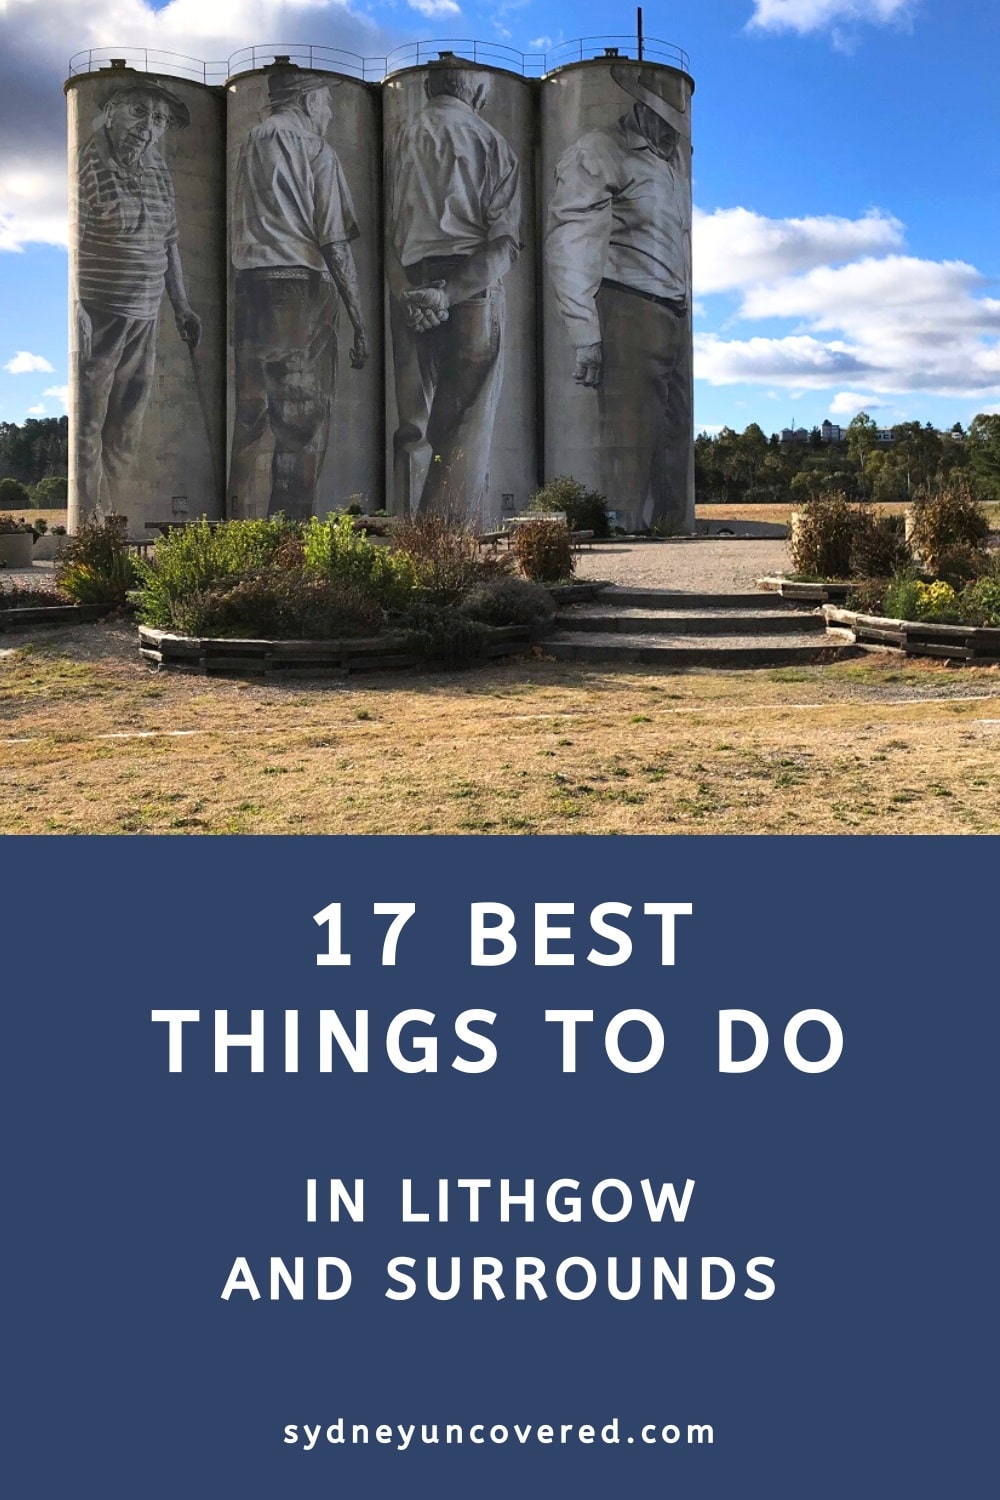 17 Best things to do in Lithgow and surrounds